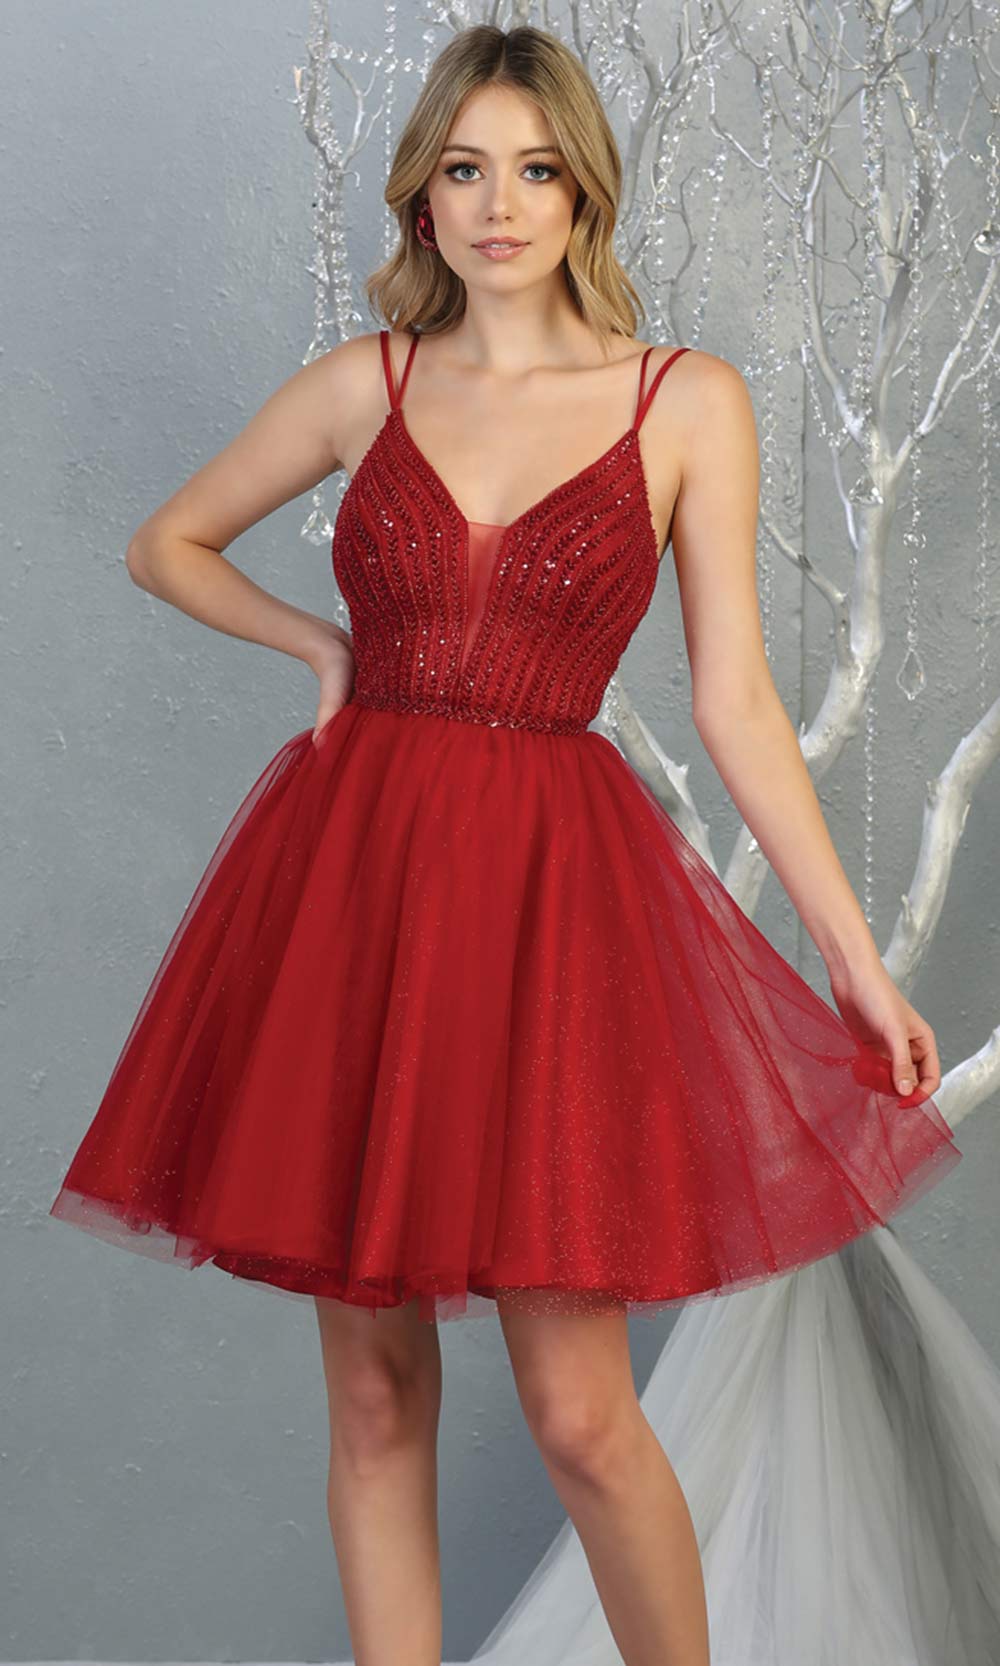 Mayqueen MQ1800 short burgundy red sequin flowy vneck grade 8 graduation dress w/ straps & puffy skirt. Dark red party dress is perfect for prom, graduation, grade 8 grad, confirmation dress, bat mitzvah dress, damas. Plus sizes avail for grad dress.jpggrade 8 grad dresses, graduation dresses